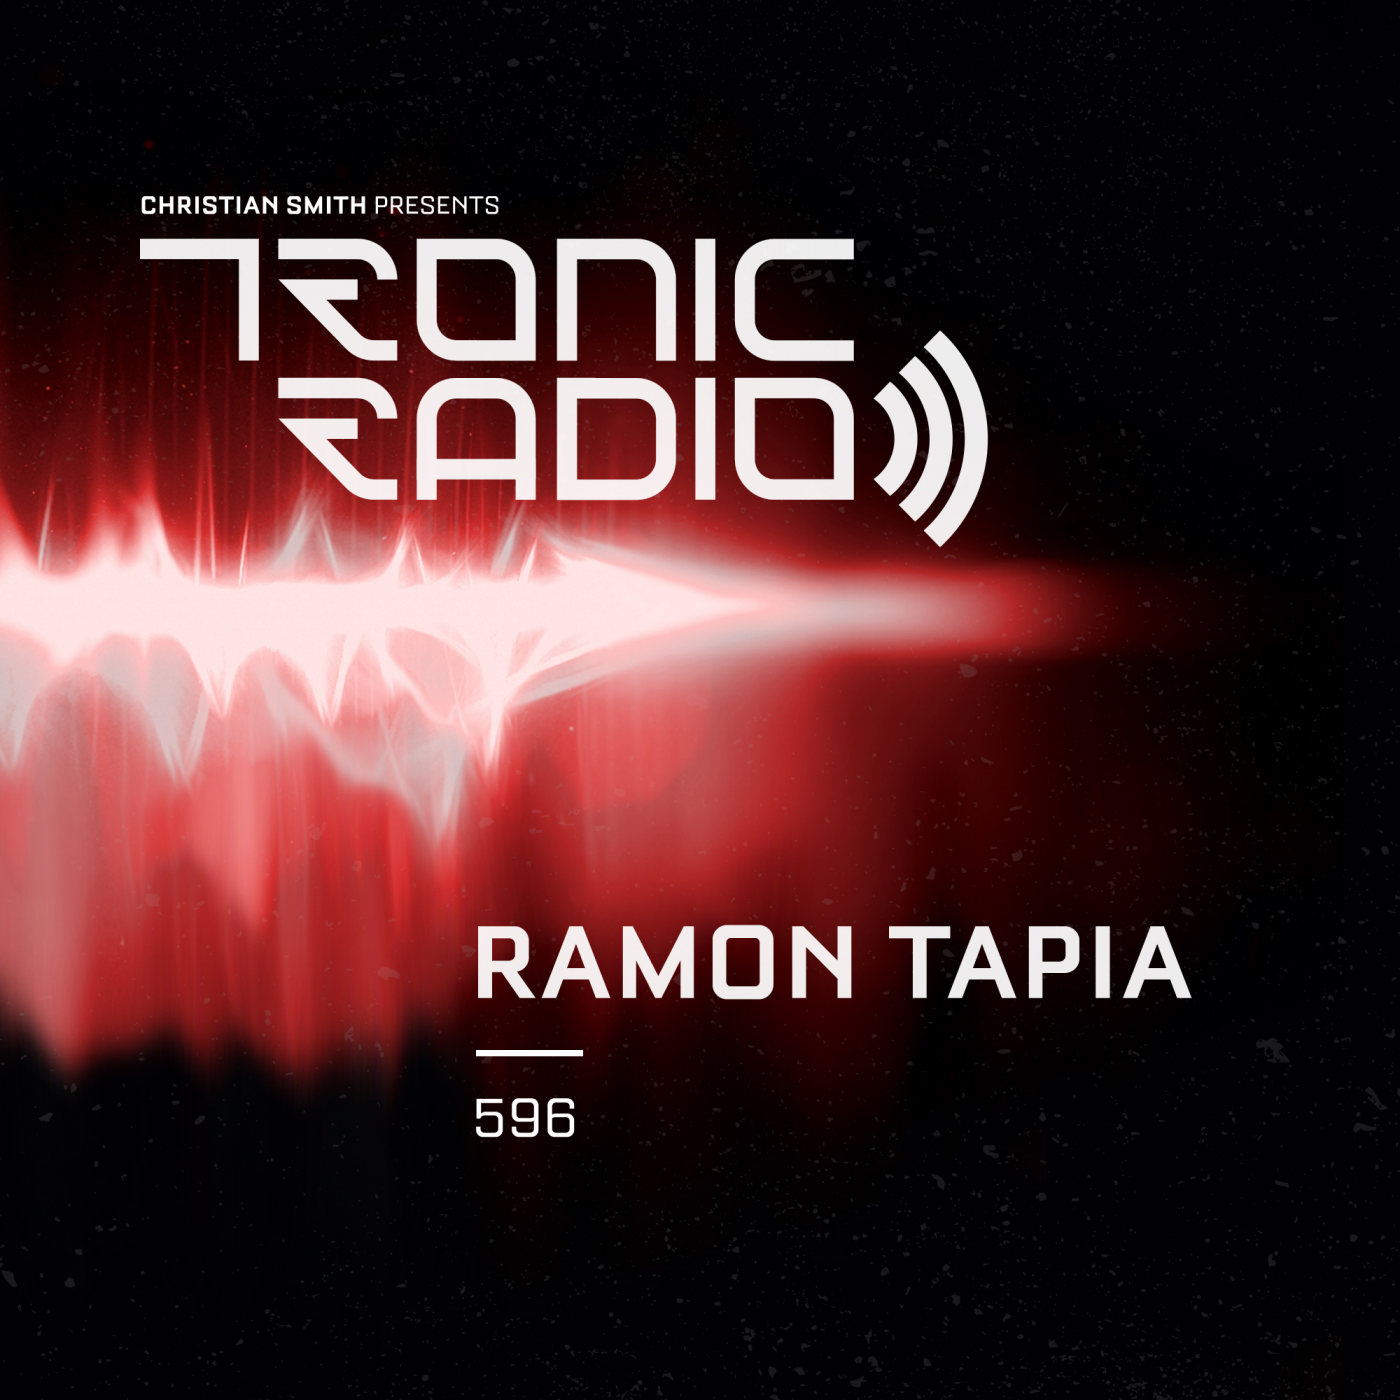 Tronic Podcast 596 with Ramon Tapia